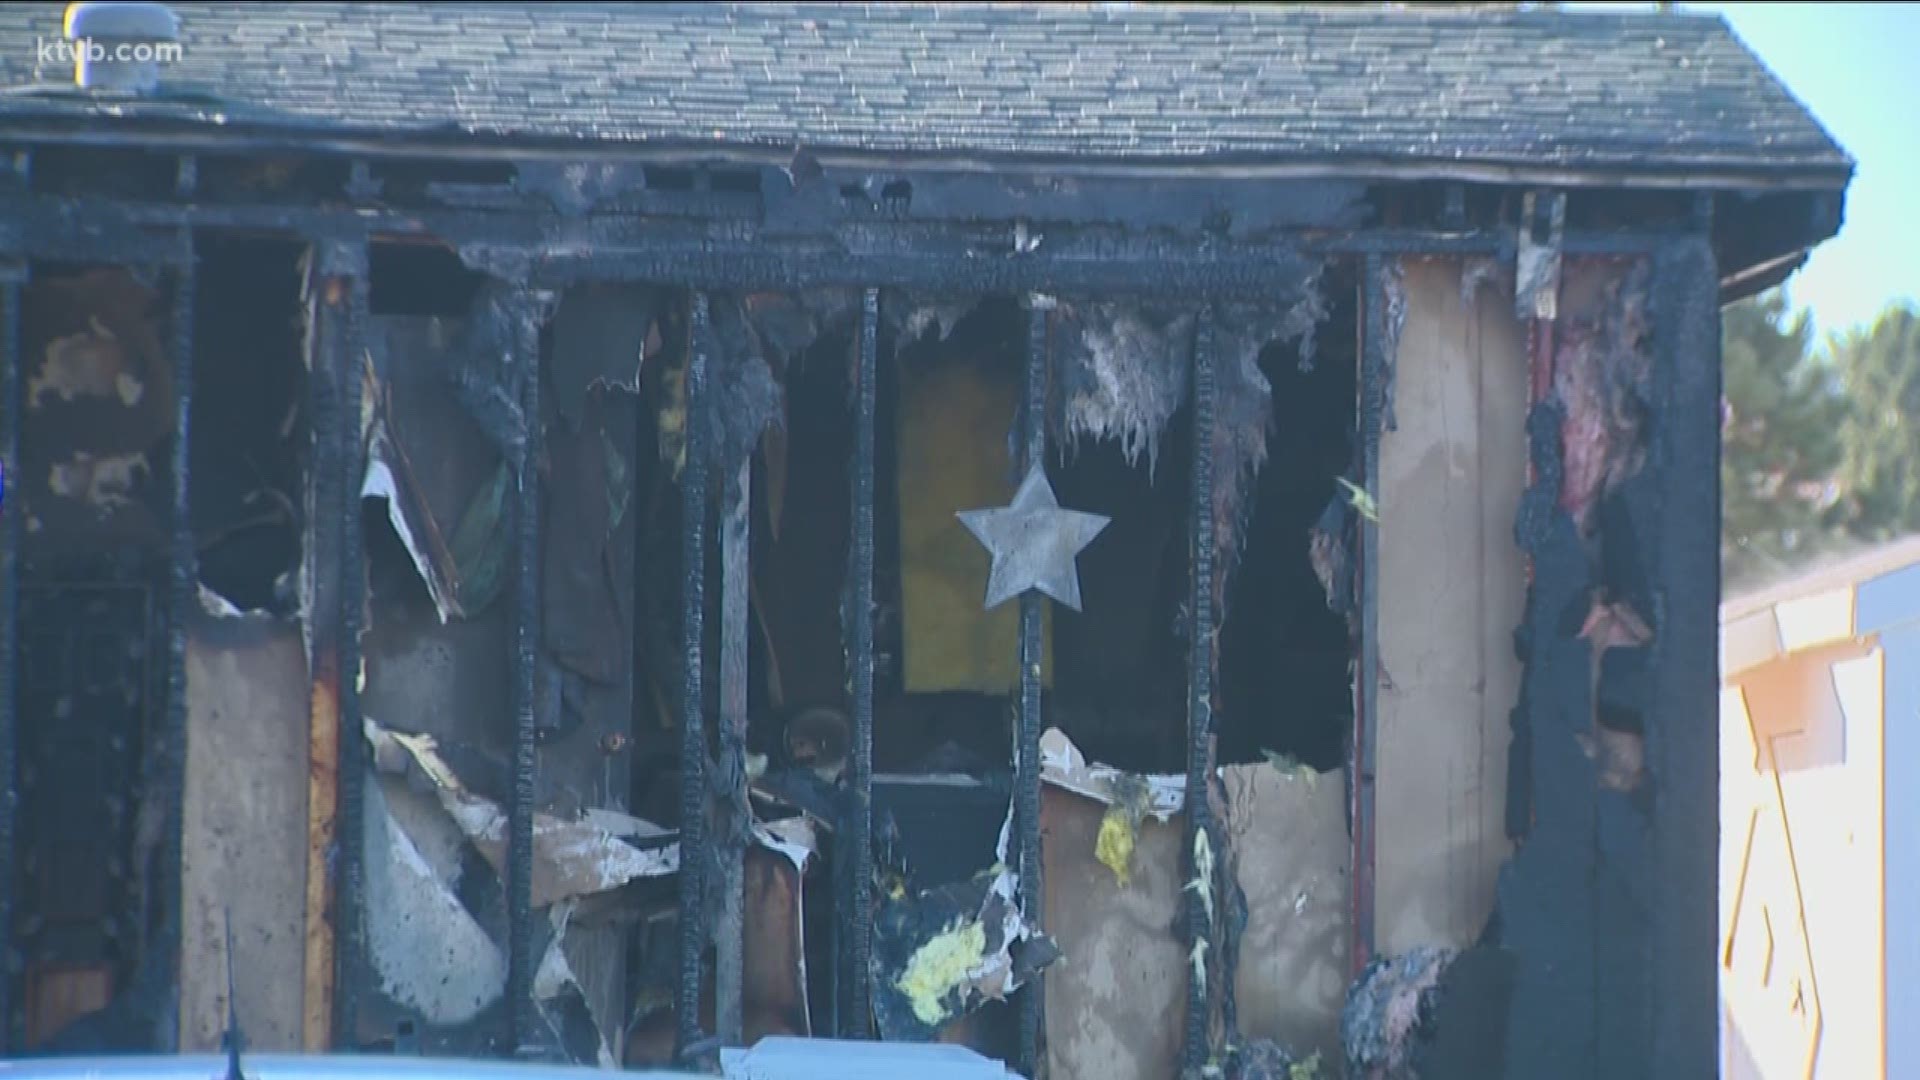 The fire started on the porch of a home along Midway Road.